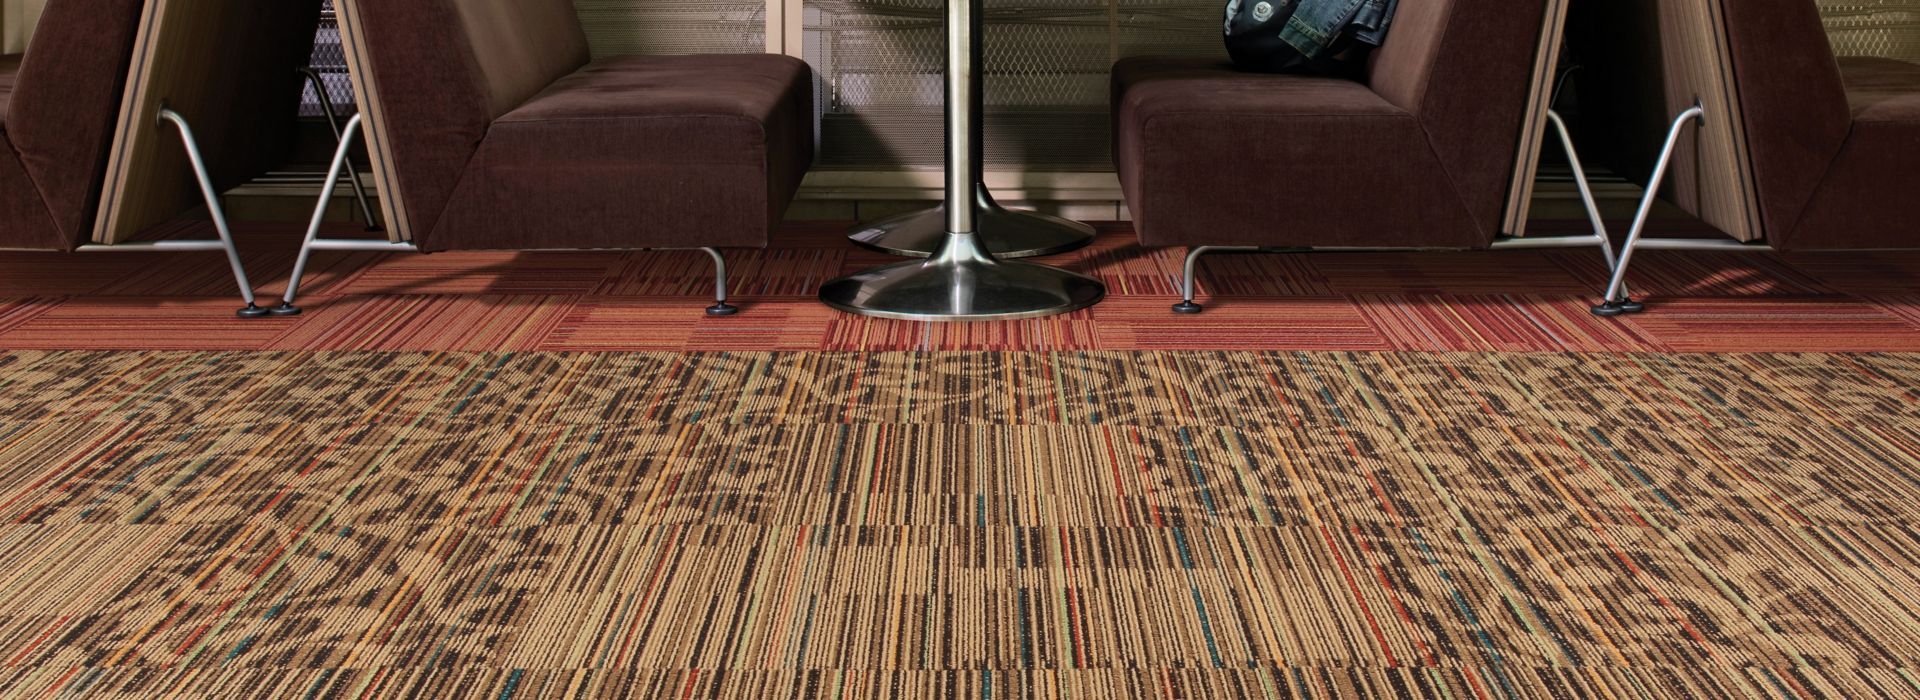 Interface Lima Colores carpet tile in dining area with multiple brown booths